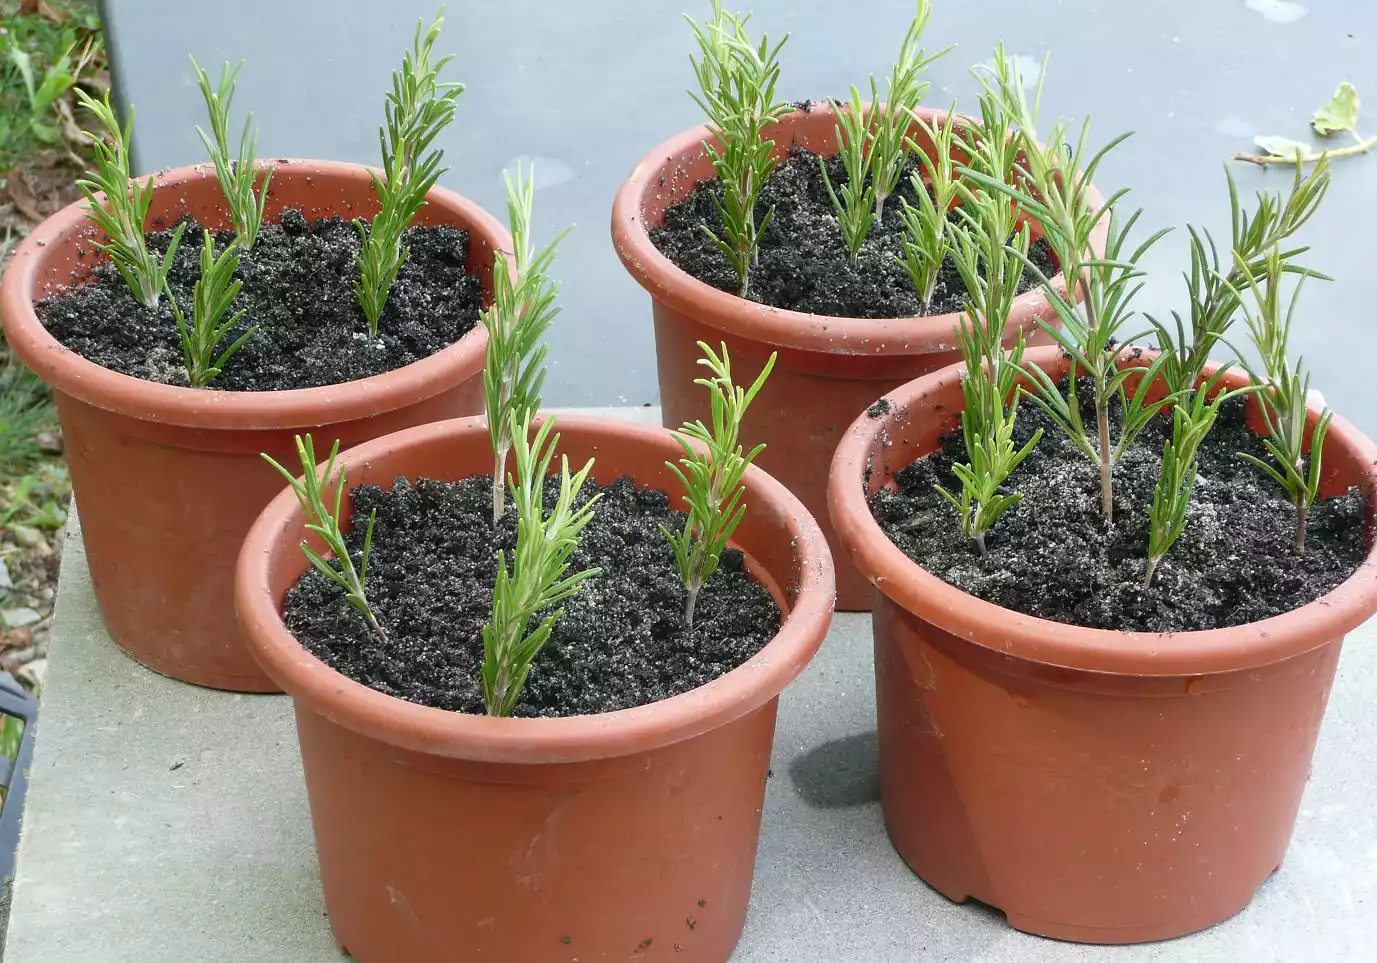 Four pots filled with mature, green rosemary sprigs